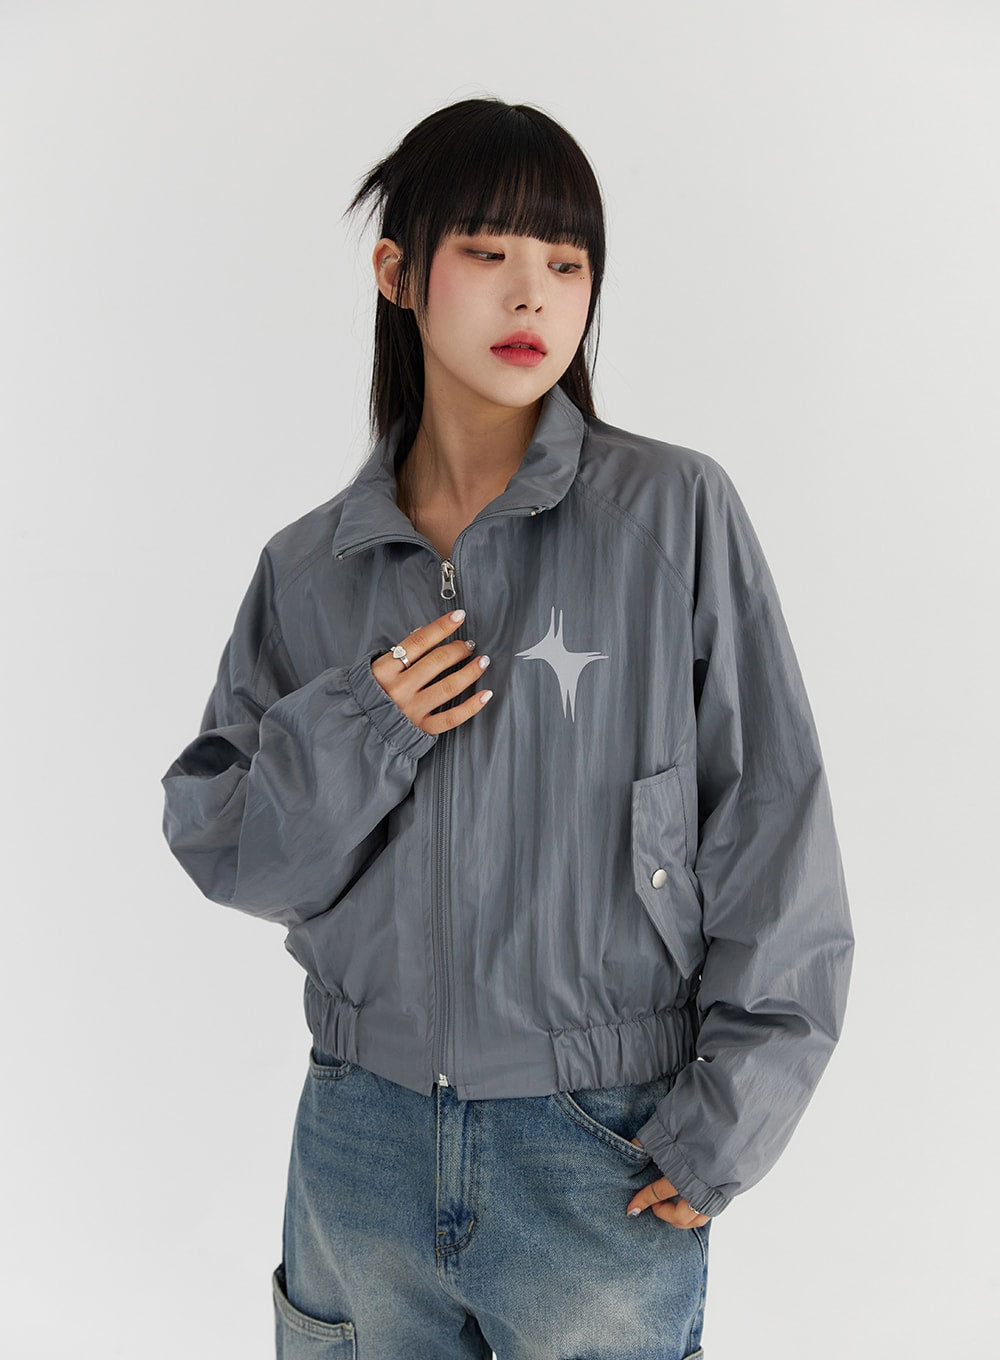 graphic-wind-jacket-co304